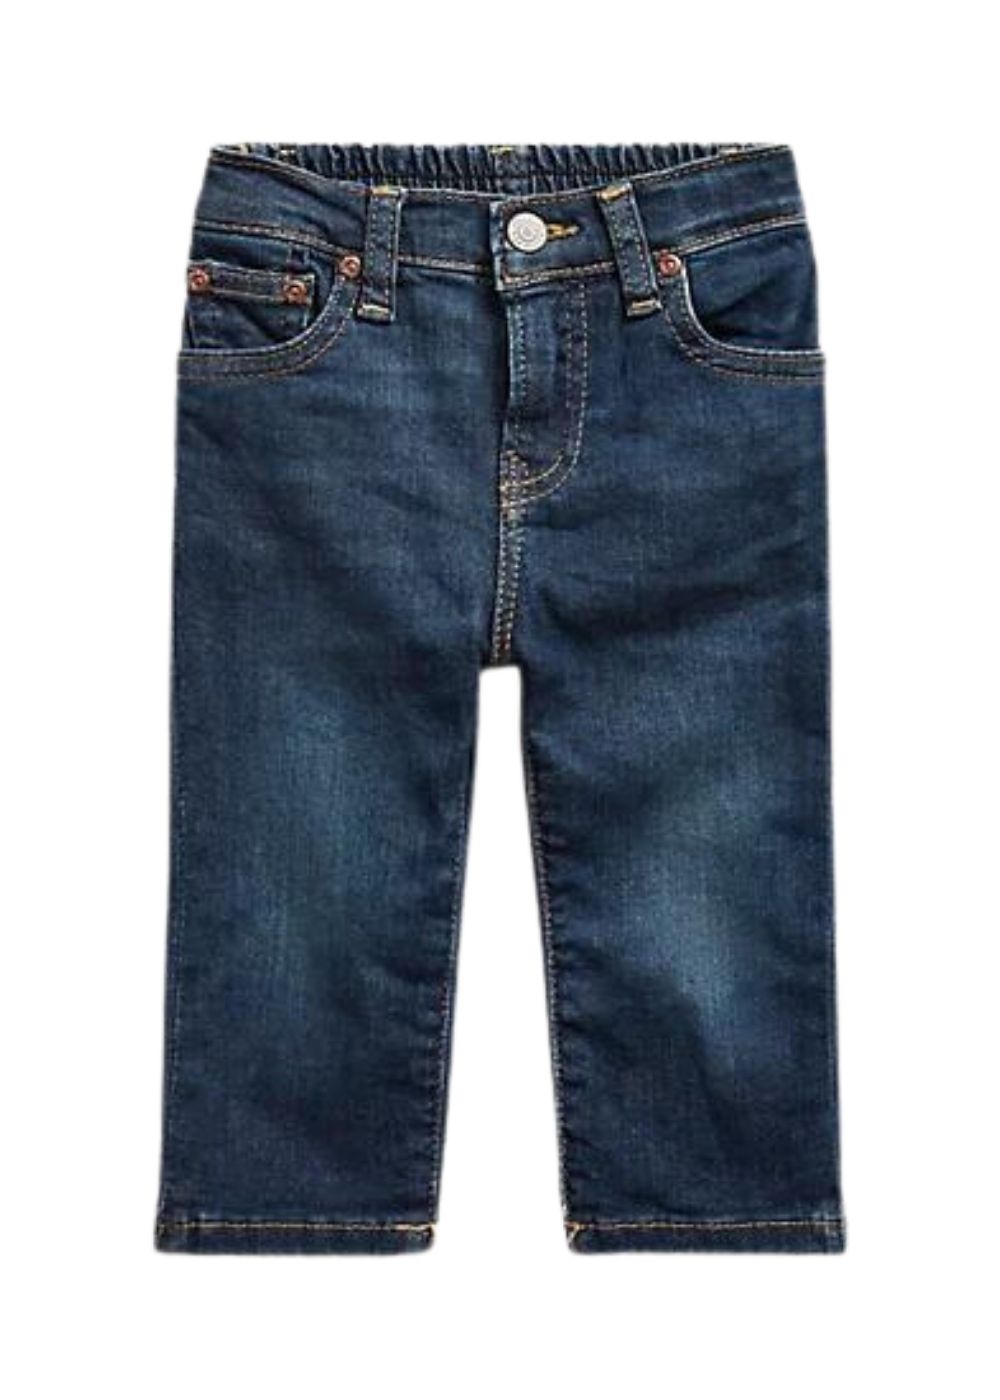 Featured image for “Polo Ralph Lauren Jeans Neonato”